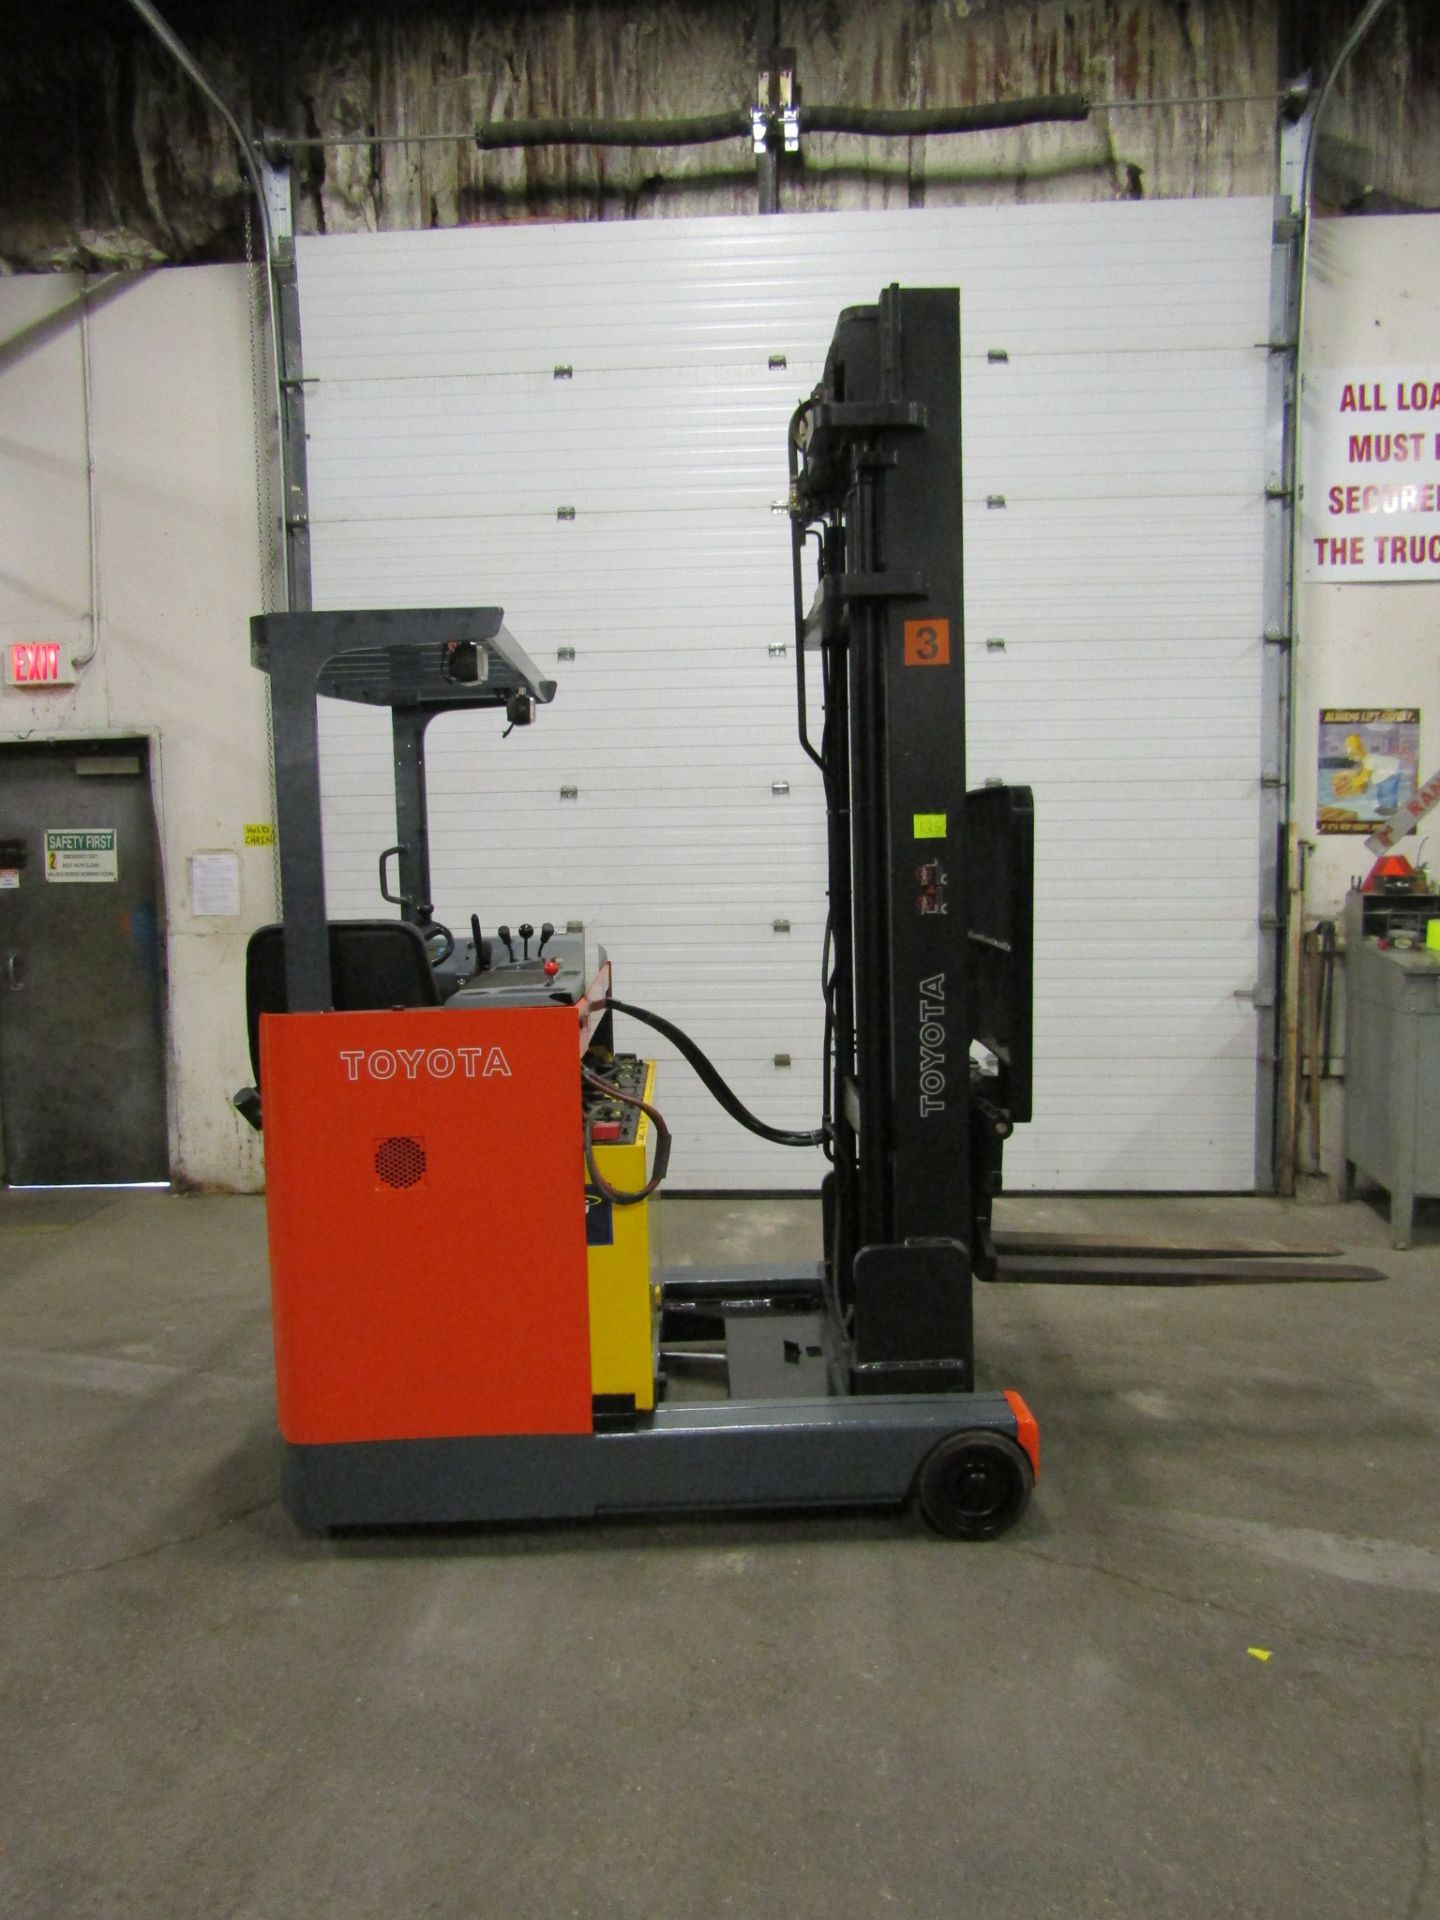 Toyota Standup Warehouse Forklift REACH TRUCK unit with 3-stage mast - 3200lbs Capacity